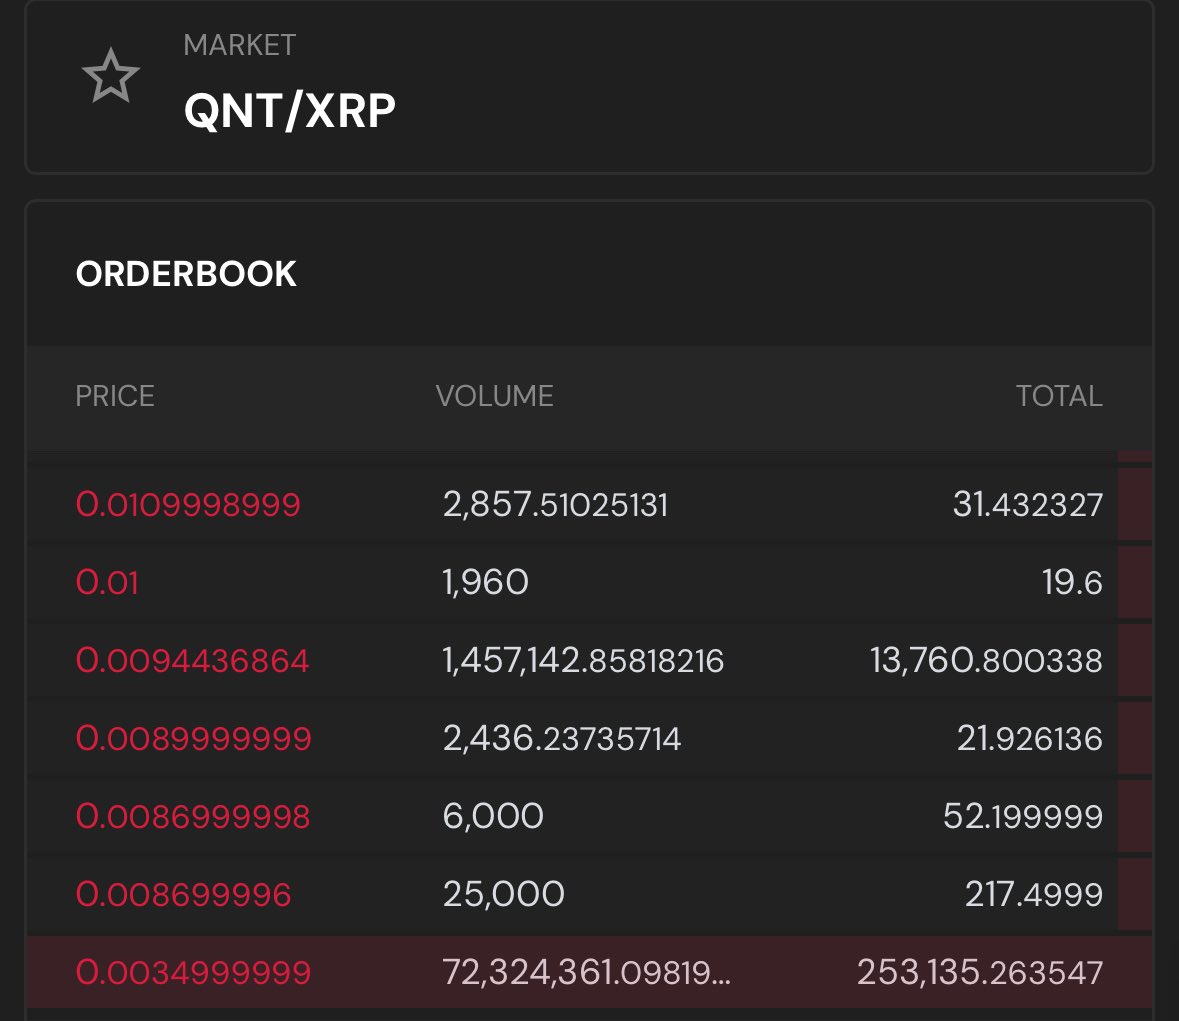 🚨12 DAYS TO GO! 
$QNT PRESALE IS CLOSING! 

MAXIMIZE YOUR GAINS WITH BUYBACK 🔥

➡️ BUY HERE: sologenic.org/trade?network=… 

➡️ OR HERE: xmagnetic.org/dex/QNT+rGPsXn…

➡️ TELEGRAM: t.me/quantumxrpl

AI TRADING BOT ON XRP LEDGER 🚀 | #XRP #XRPL